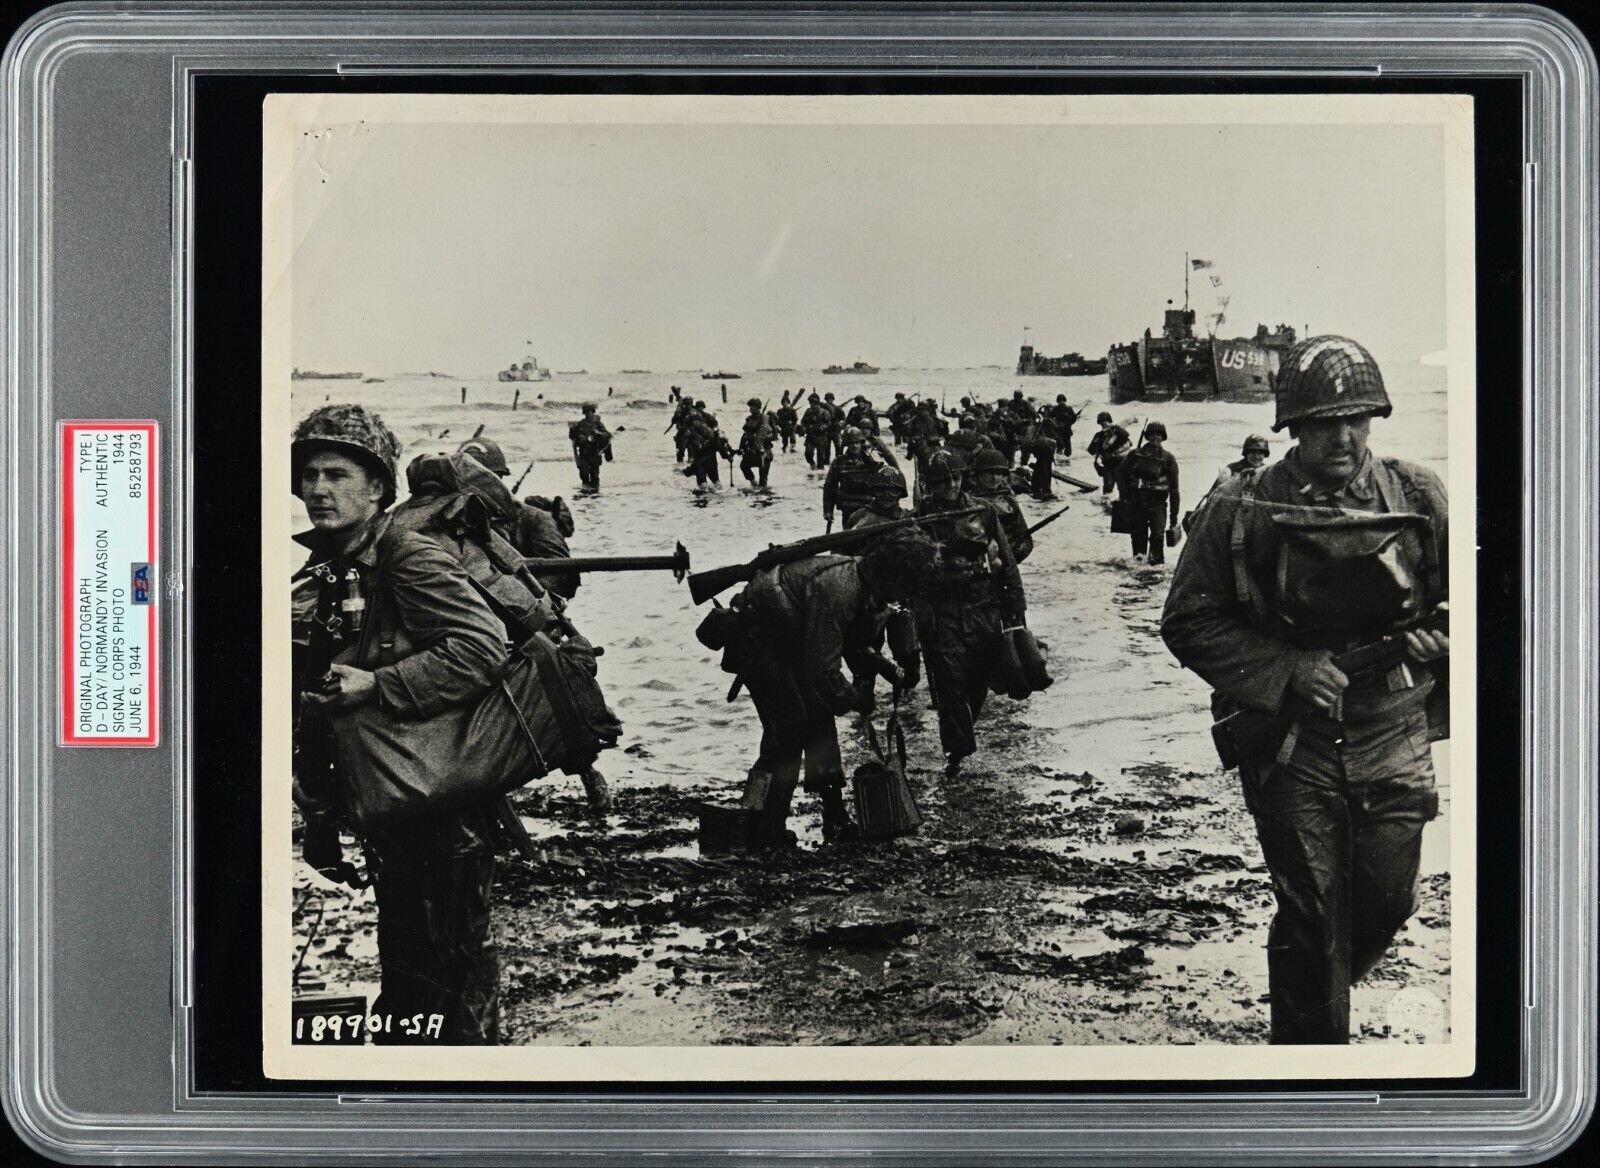 D-Day June 6, 1944 WWII Normandy Invasion PSA Type 1 Superb Original Photo + LOA